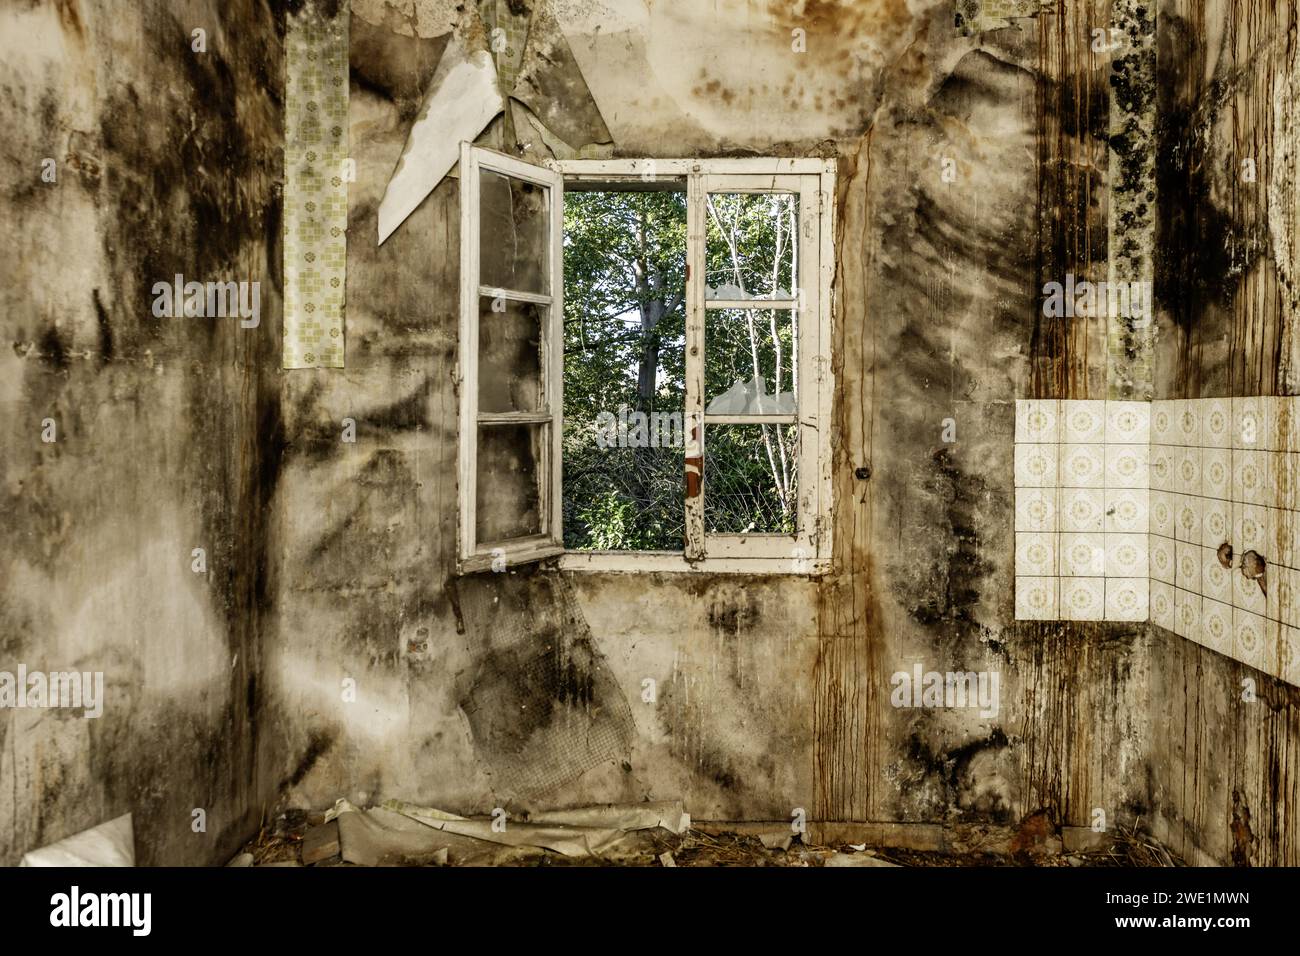 Interior of a dirty and dilapidated room in an abandoned house Stock Photo